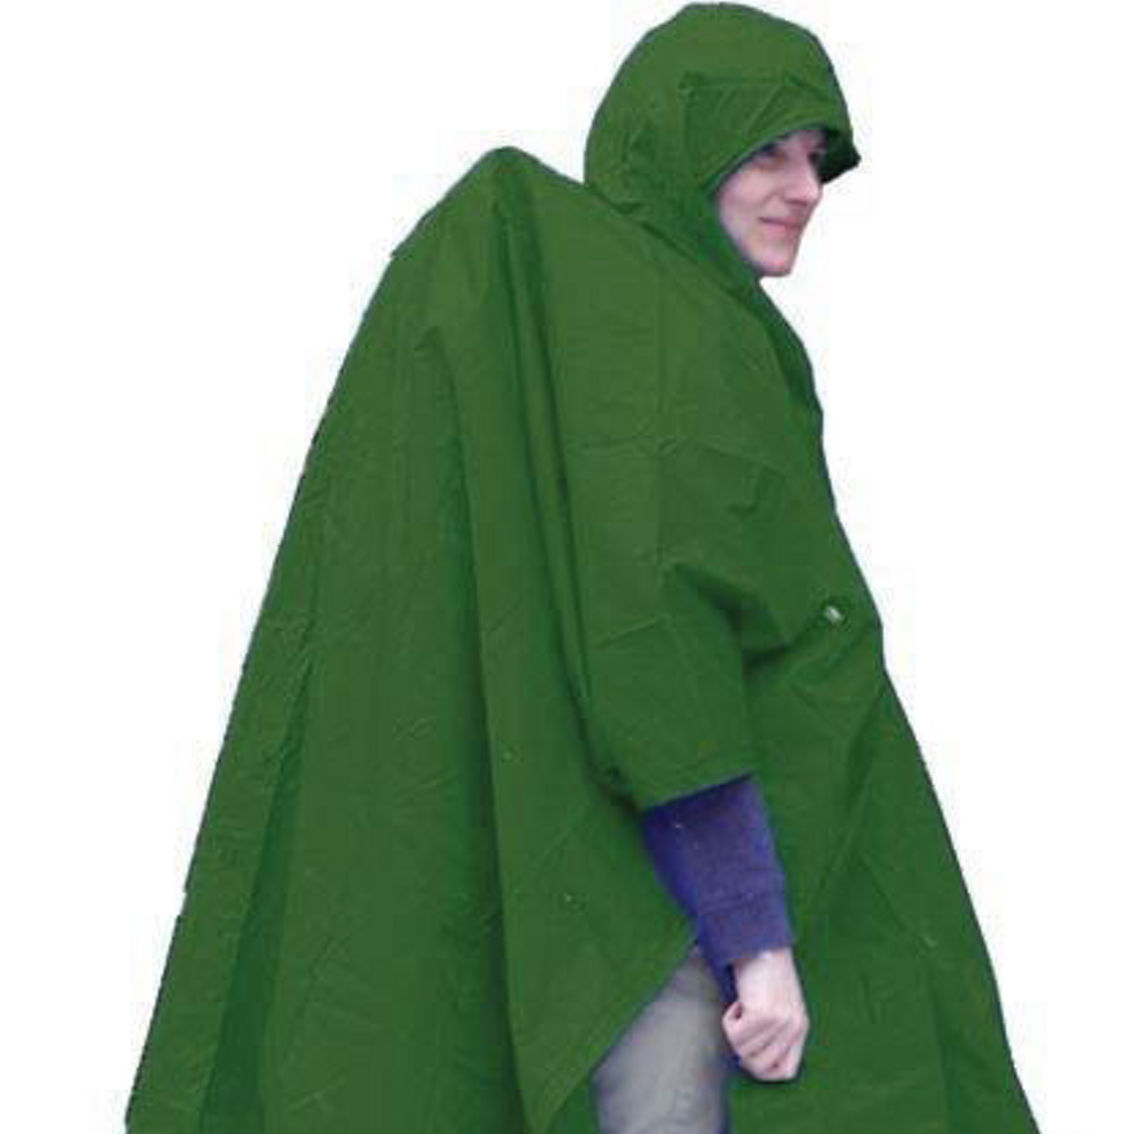 EXTENSION ULTRALITE PONCHO - Image 2 of 2